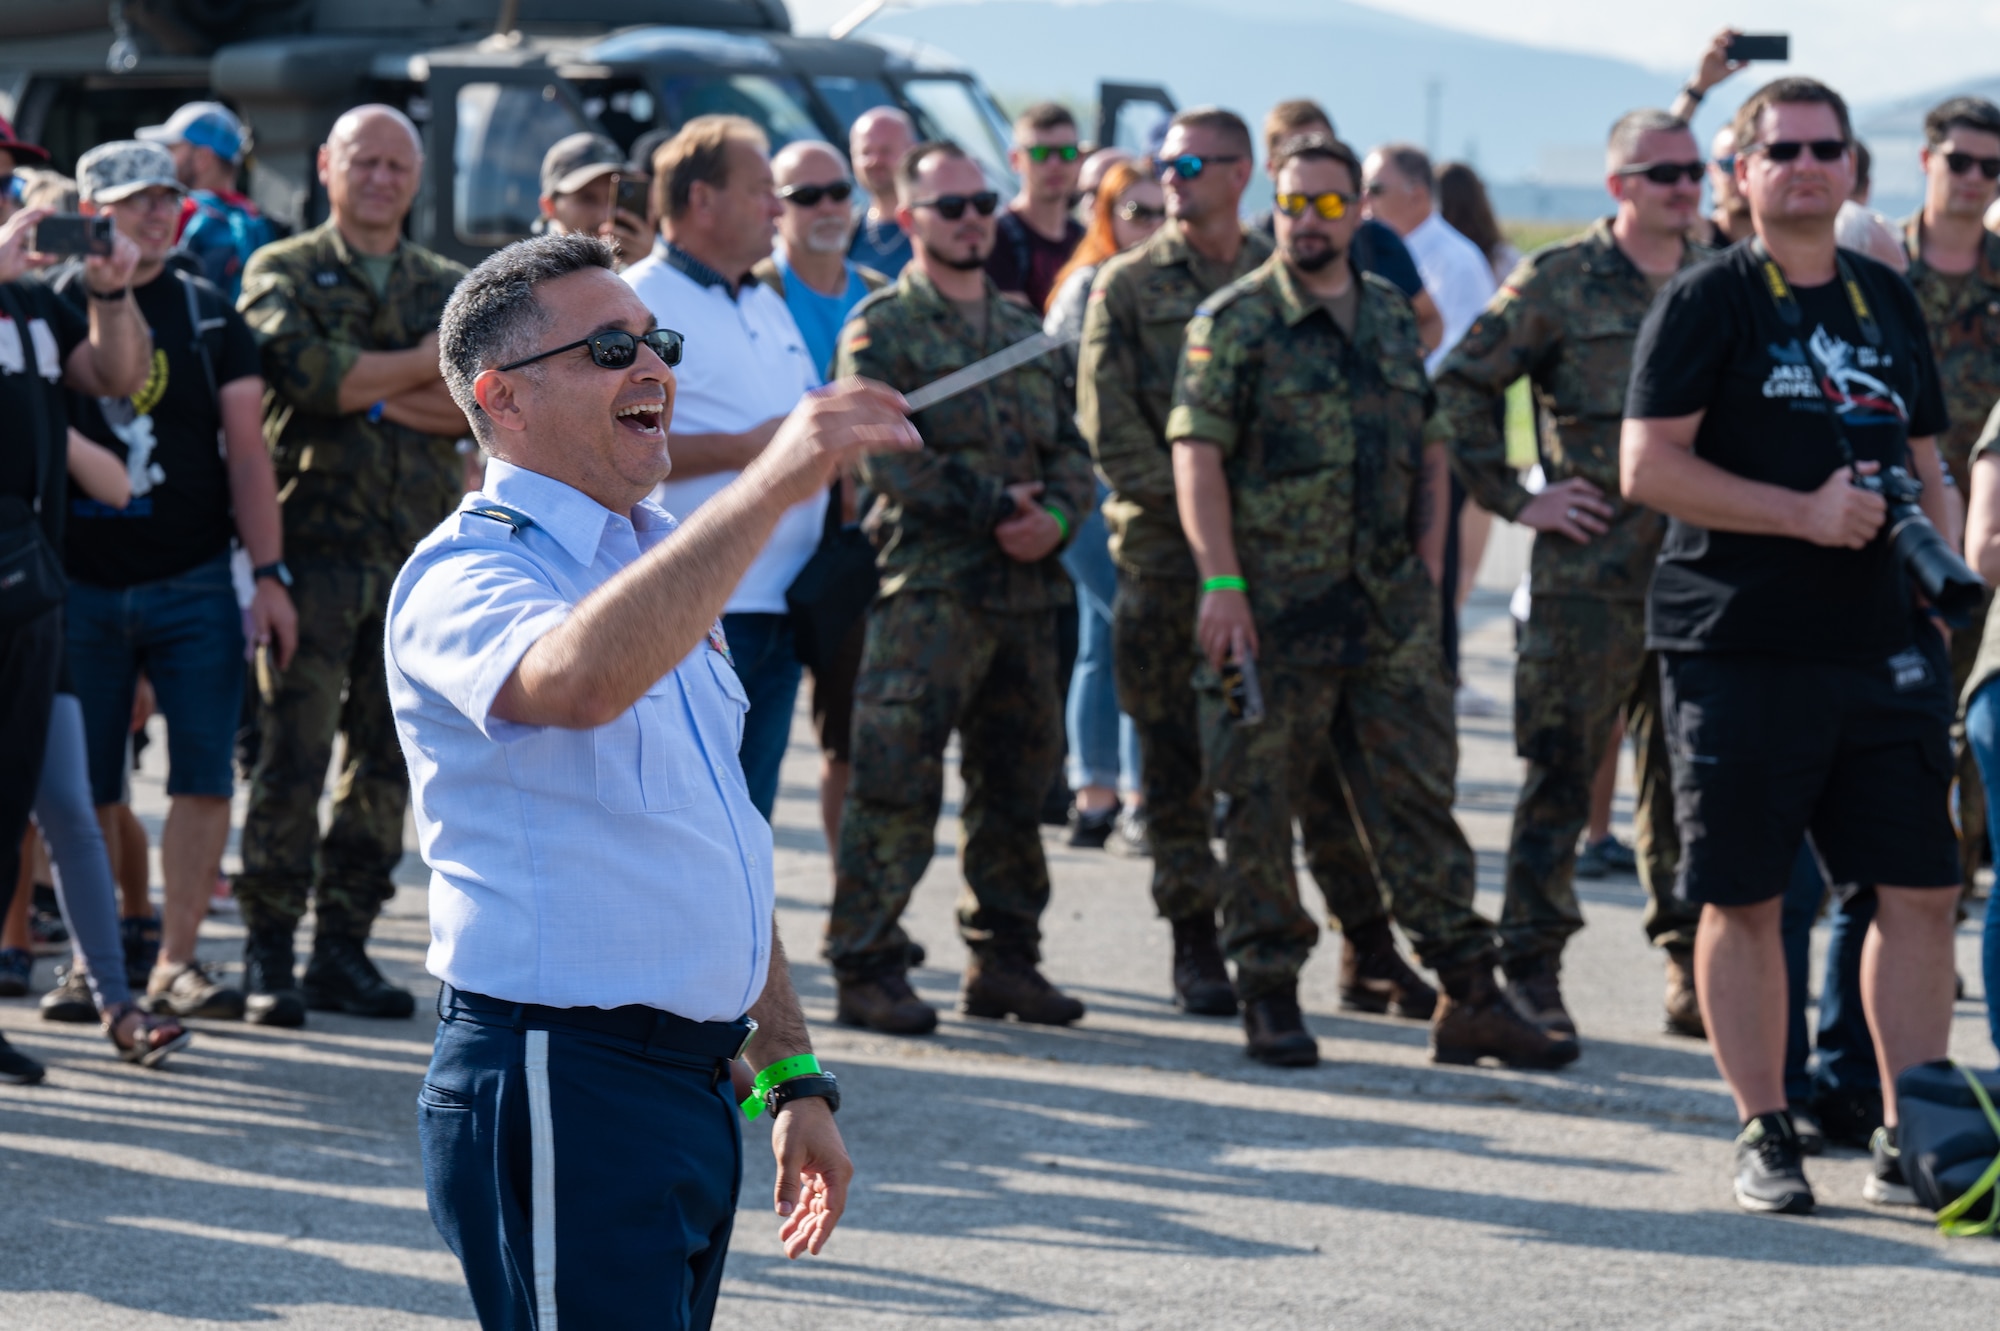 U.S. Air Force Maj. Rafael F. Toro-Quiñones, U.S. Air Forces in Europe Band commander and conductor, conducts during the NATO Days event at Leoš Janáček Airport in Ostrava, Czech Republic, Sept. 17, 2023.